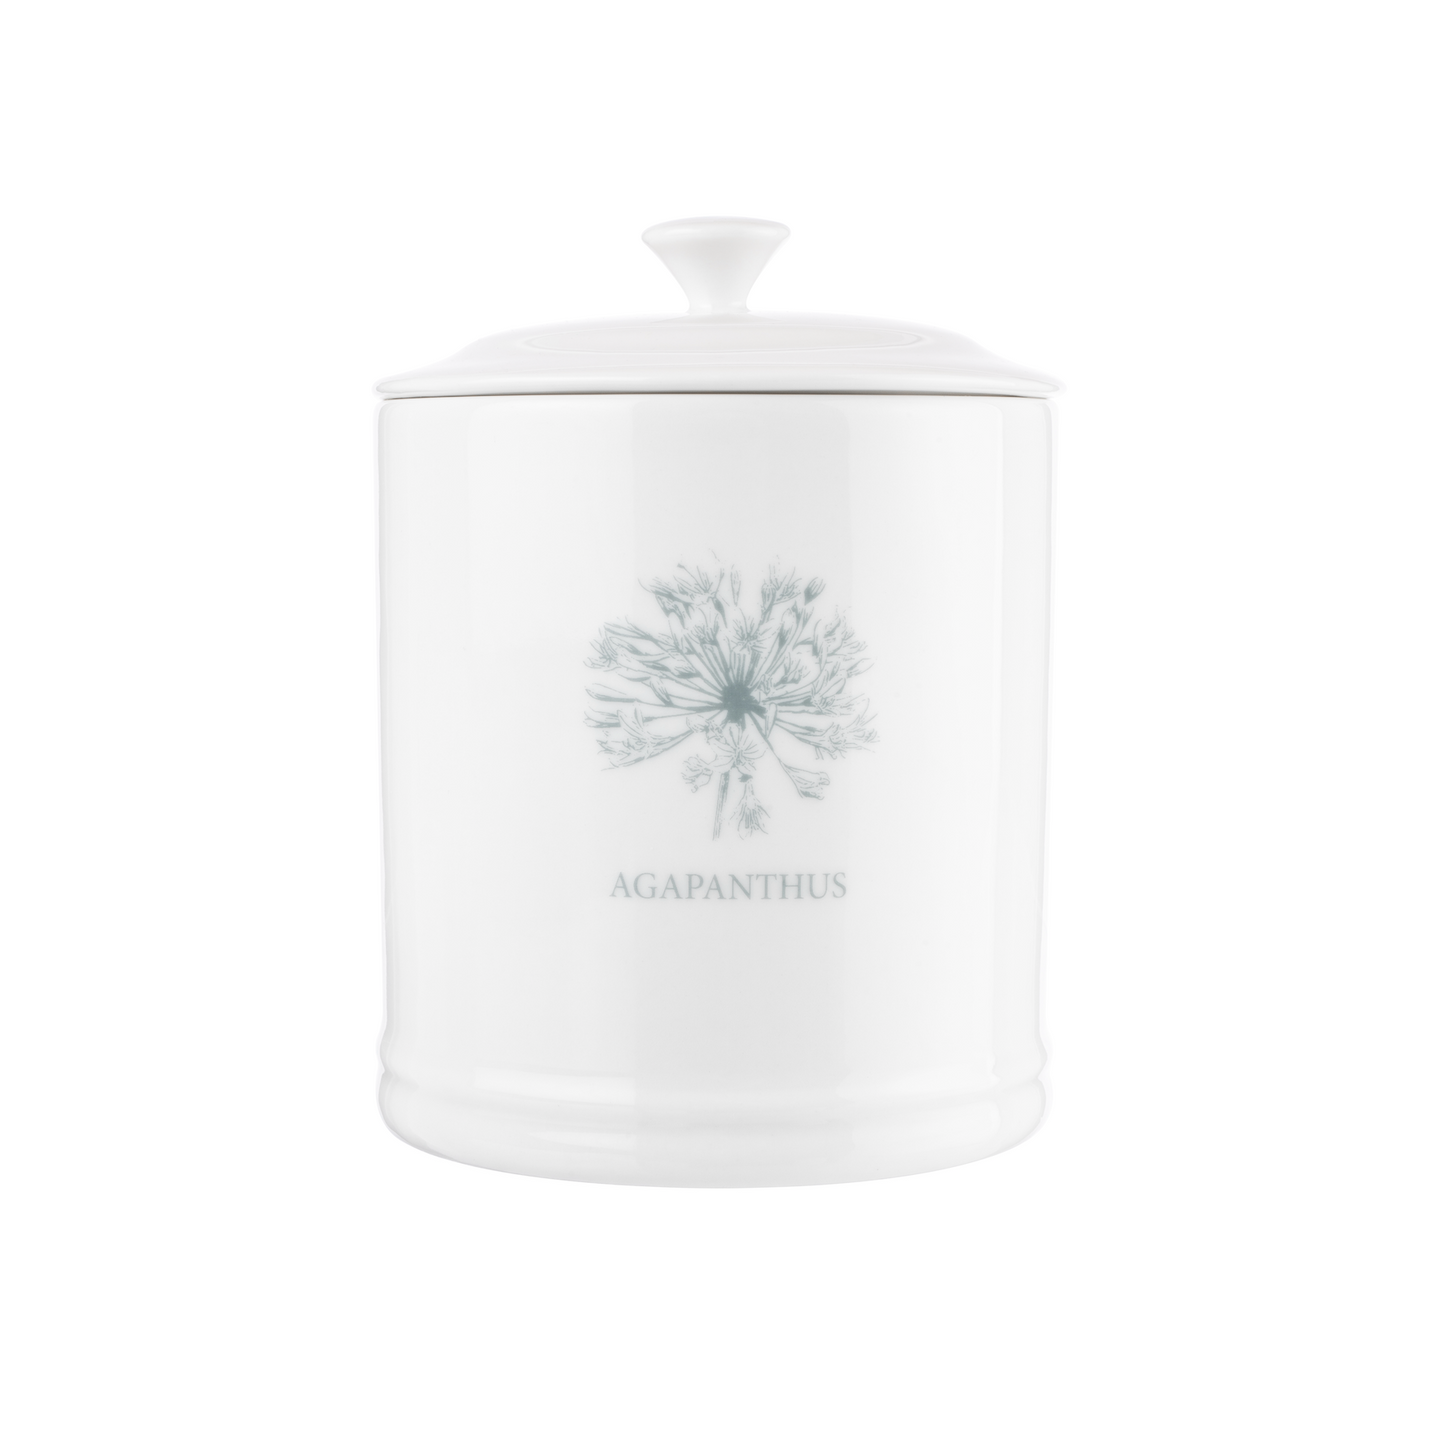 Mary Berry English Garden Collection Sugar Canister, Agapanthus